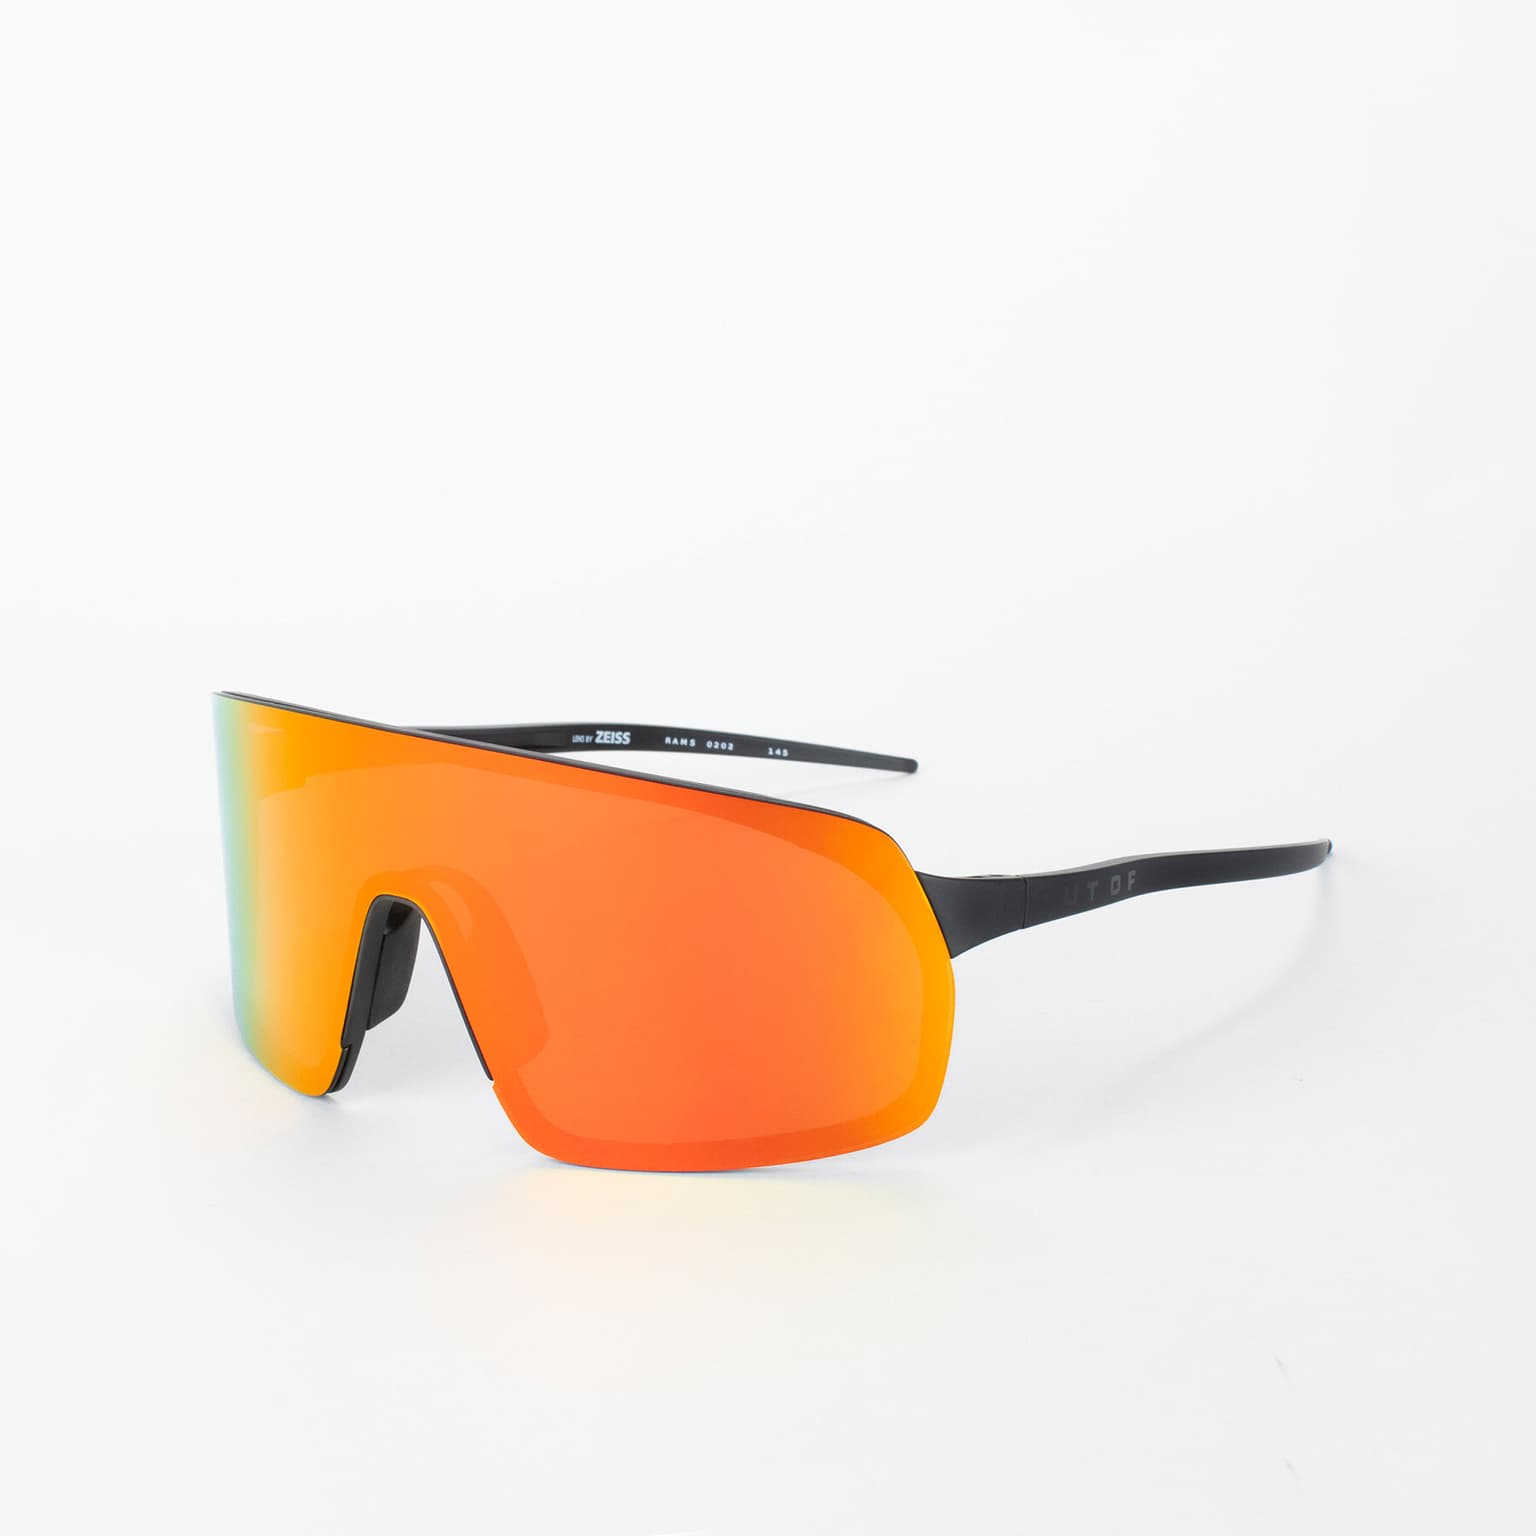 Pit Viper Pit Viper The Flip-Offs The Mystery Sportbrille 1